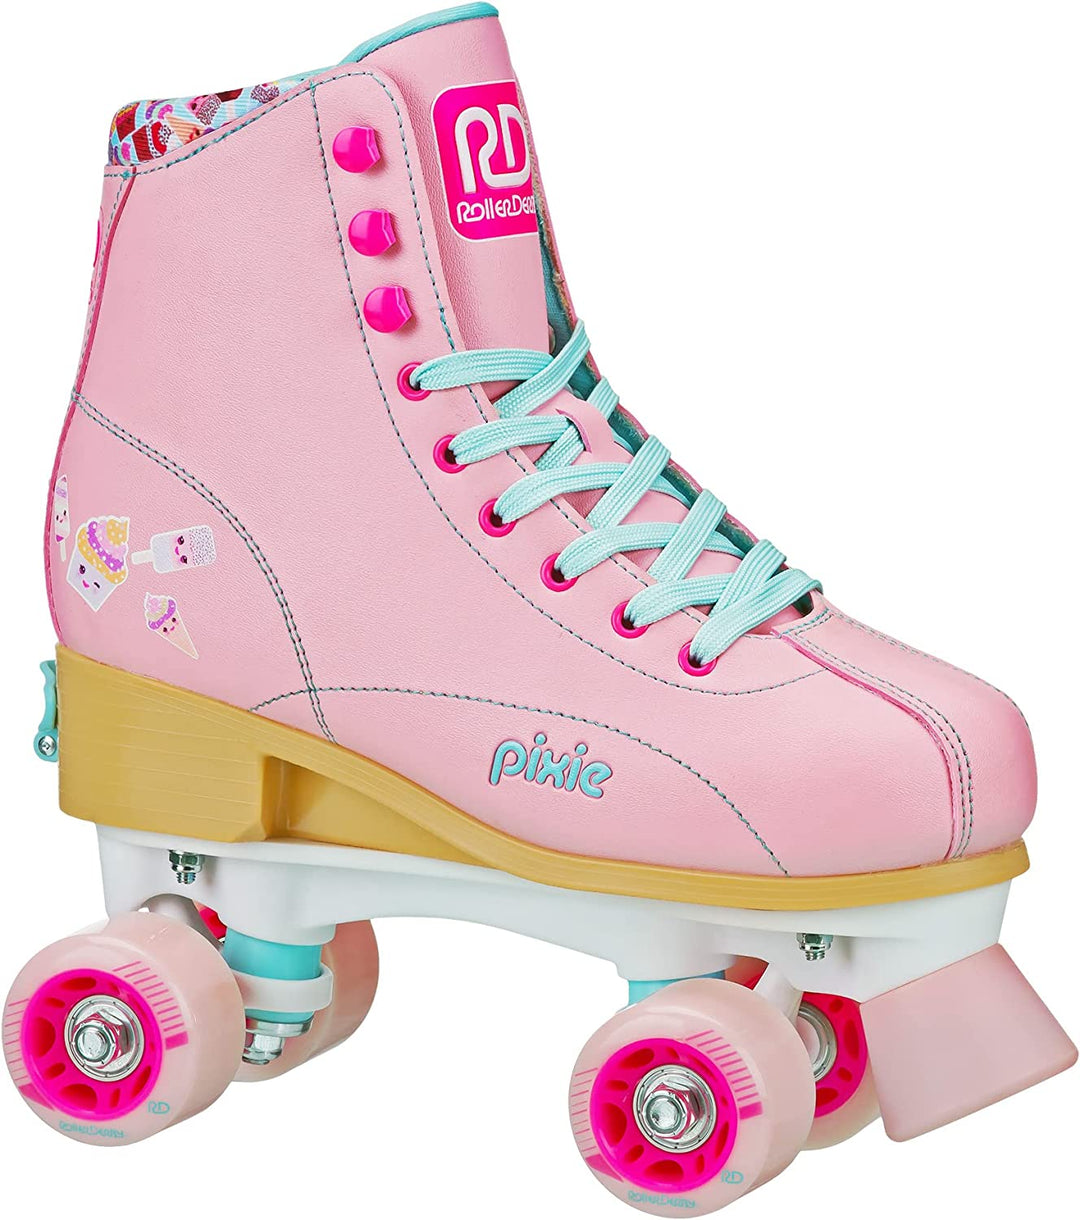 Patines Quad Roller Derby Pixie Pink Cupcake